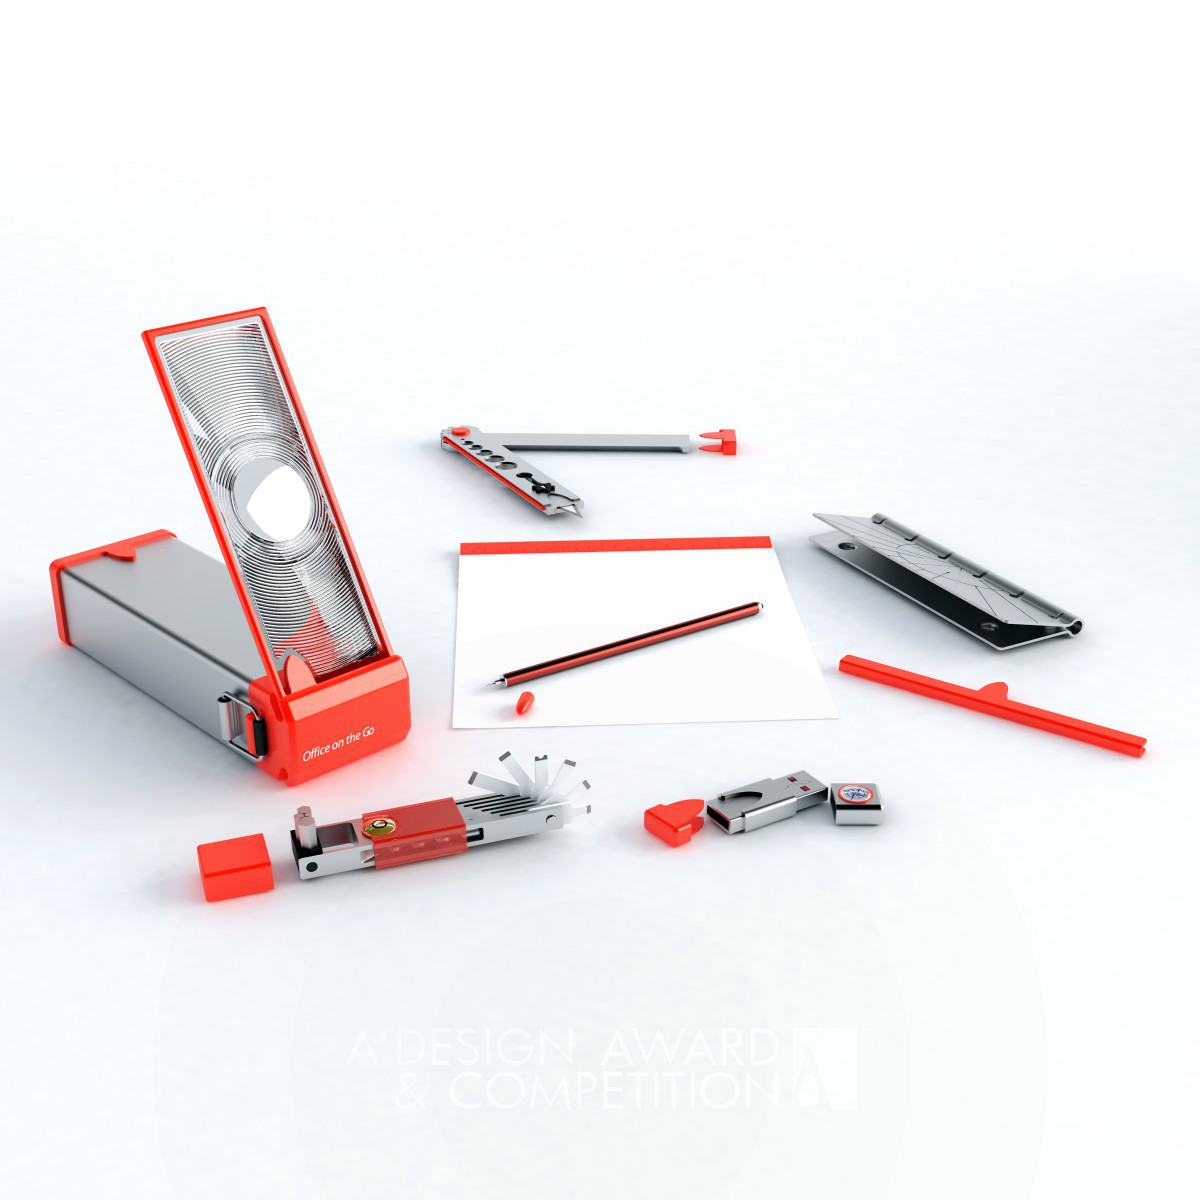 Office on the Go Stationary Kit by Hakan Gürsu Bronze Art and Stationery Supplies Design Award Winner 2016 